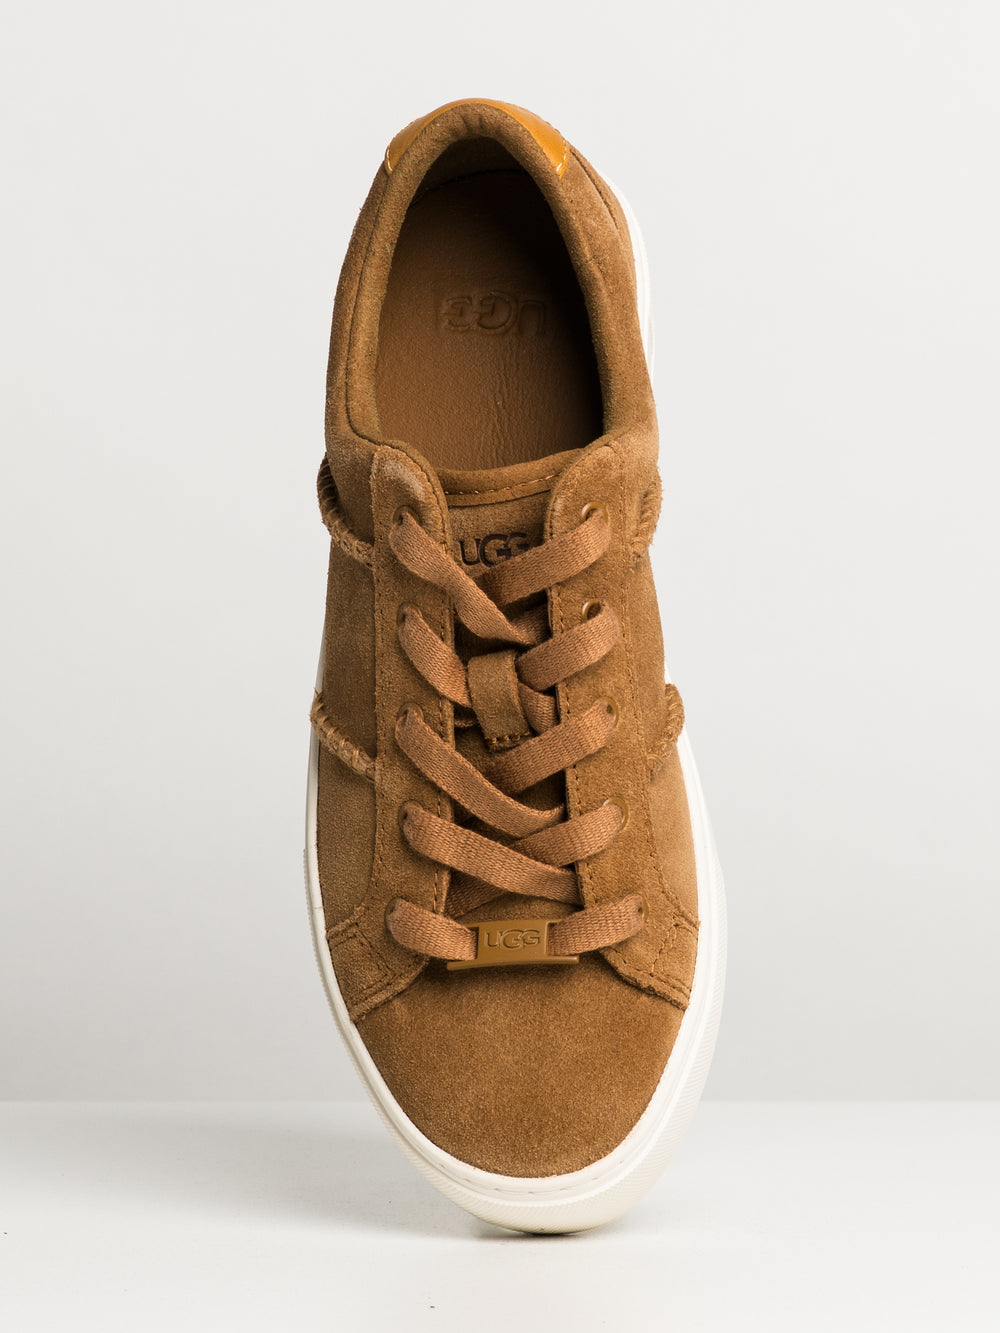 WOMENS UGG DINALE SUEDE SNEAKER - CLEARANCE